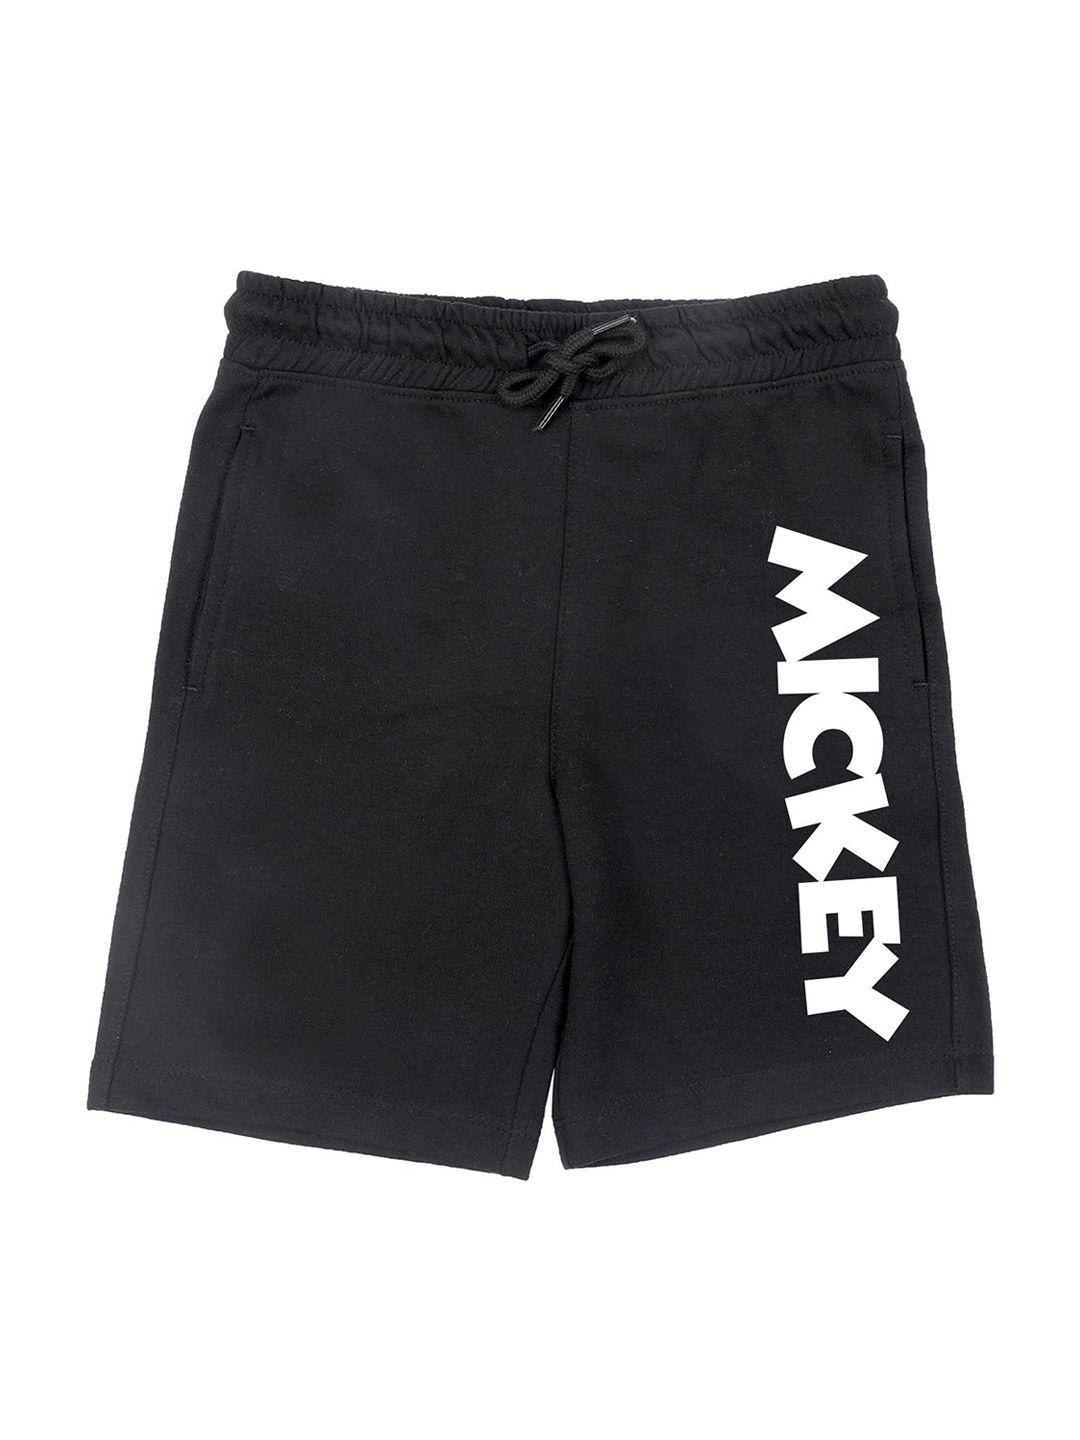 disney by wear your mind boys black mickey mouse printed shorts